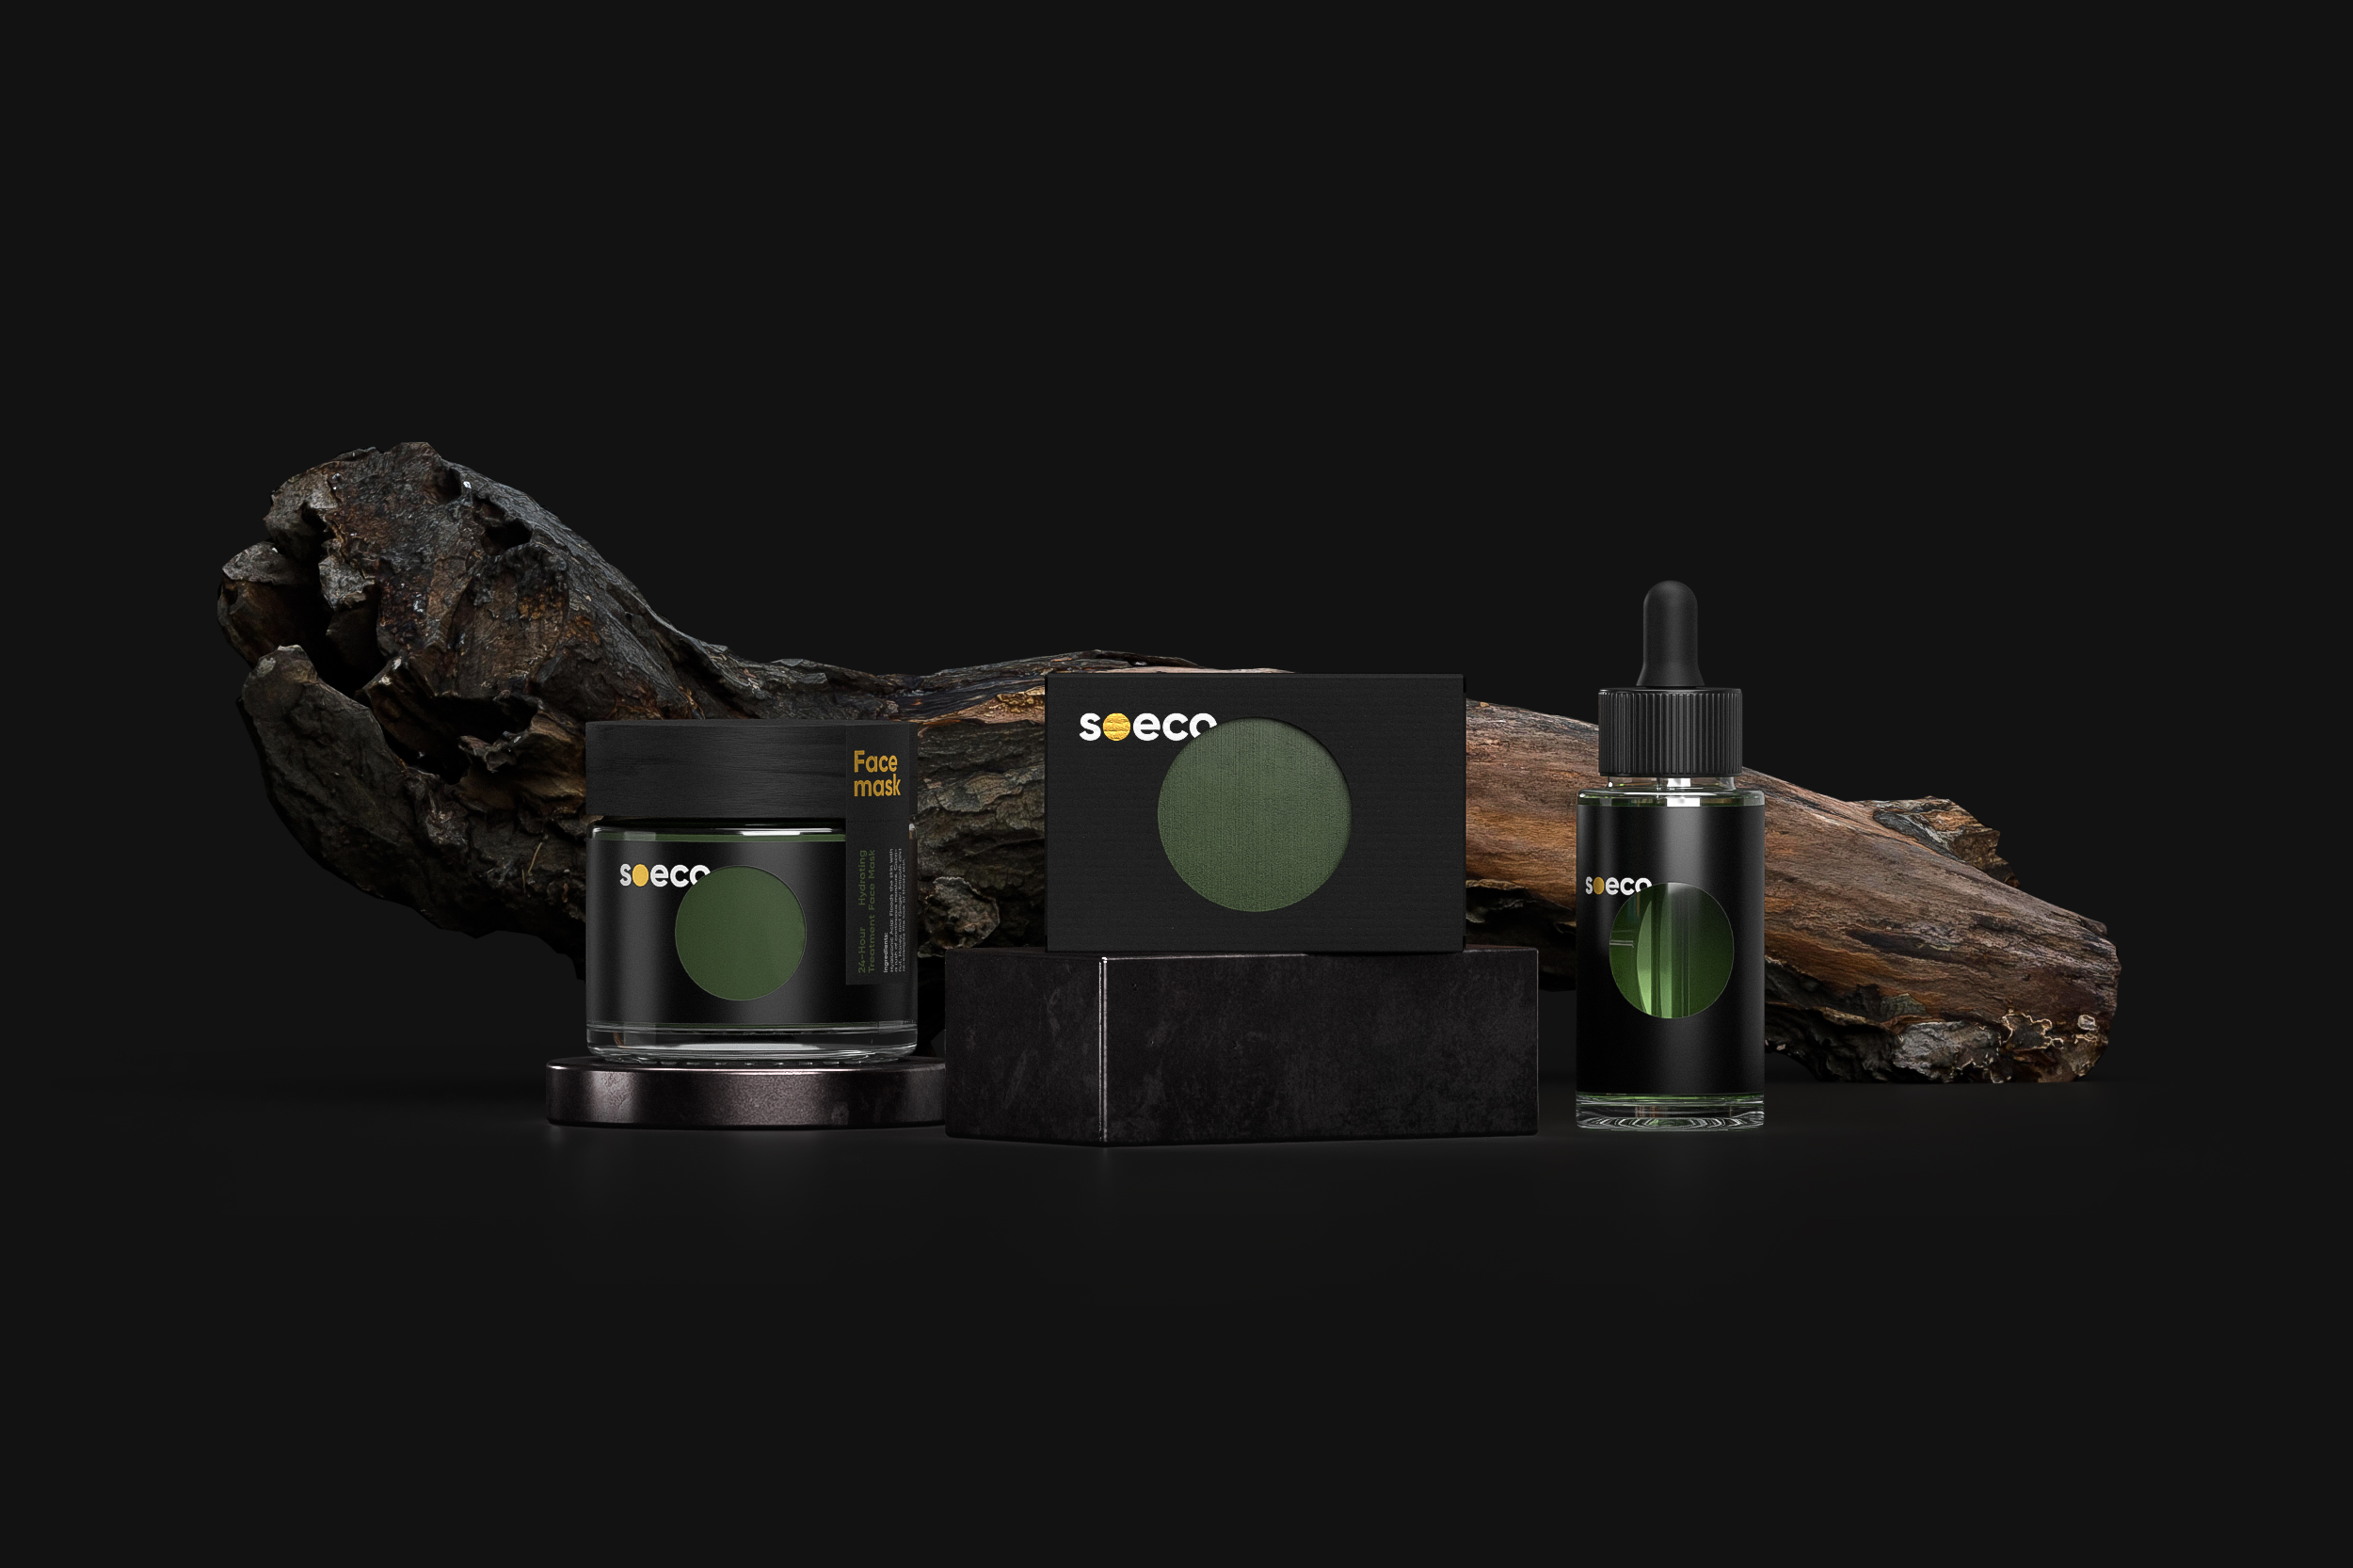 Soeco is a Concept Project for a Line of Skin Care Cosmetic Products